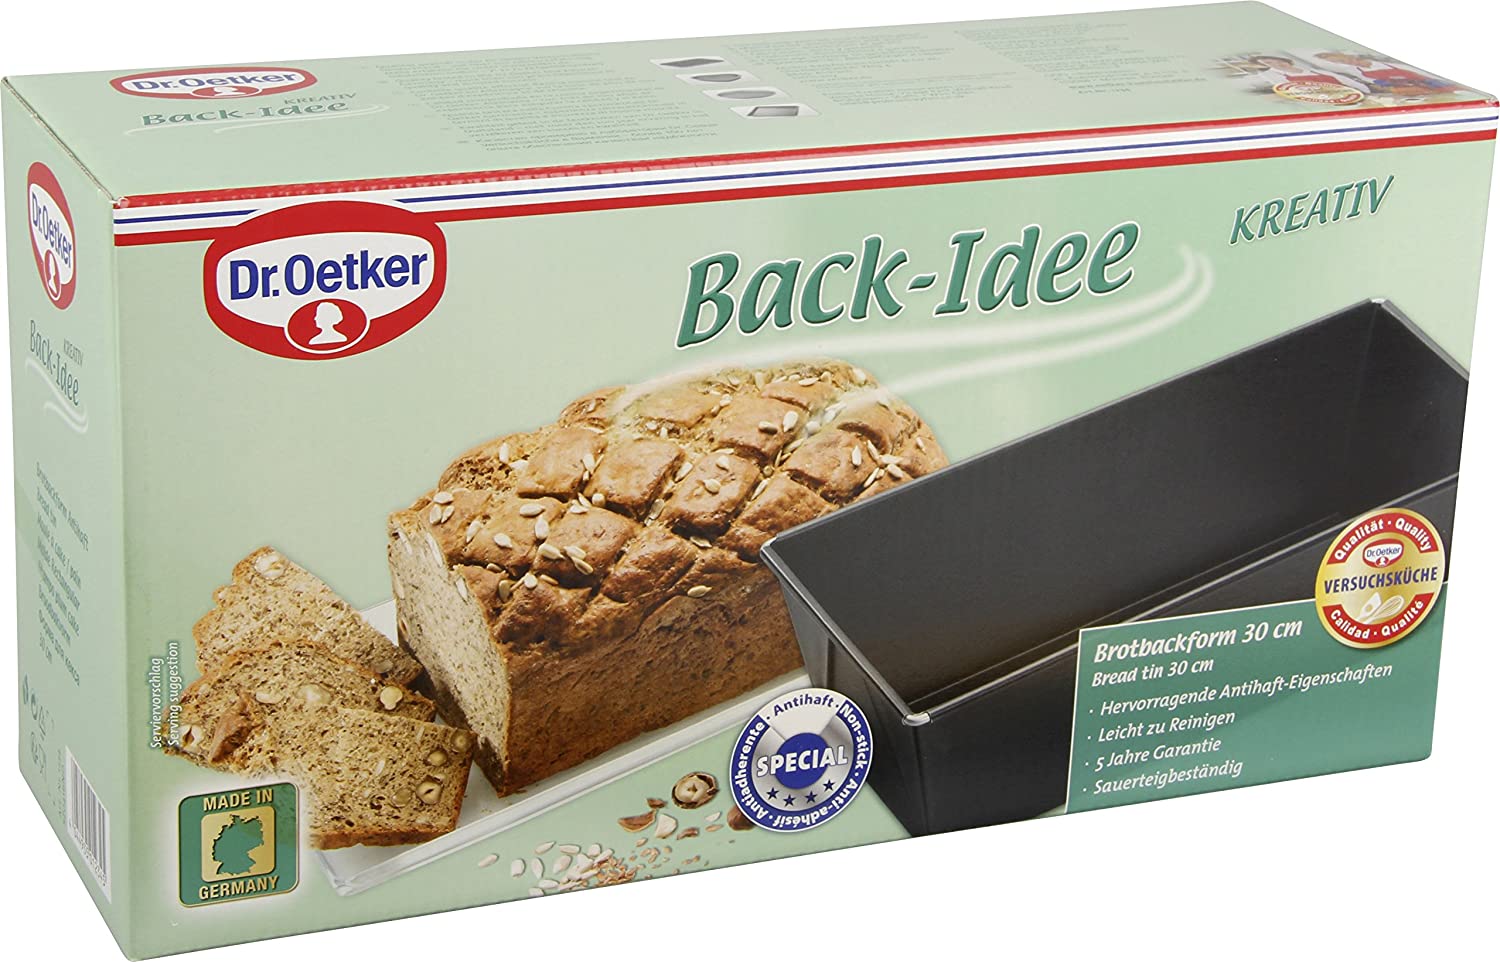 Dr. Oetker bread baking pan 30 cm, king cake pan with non-stick coating, high quality loaf pan, square cake pan (color: black), quantity: 1 piece